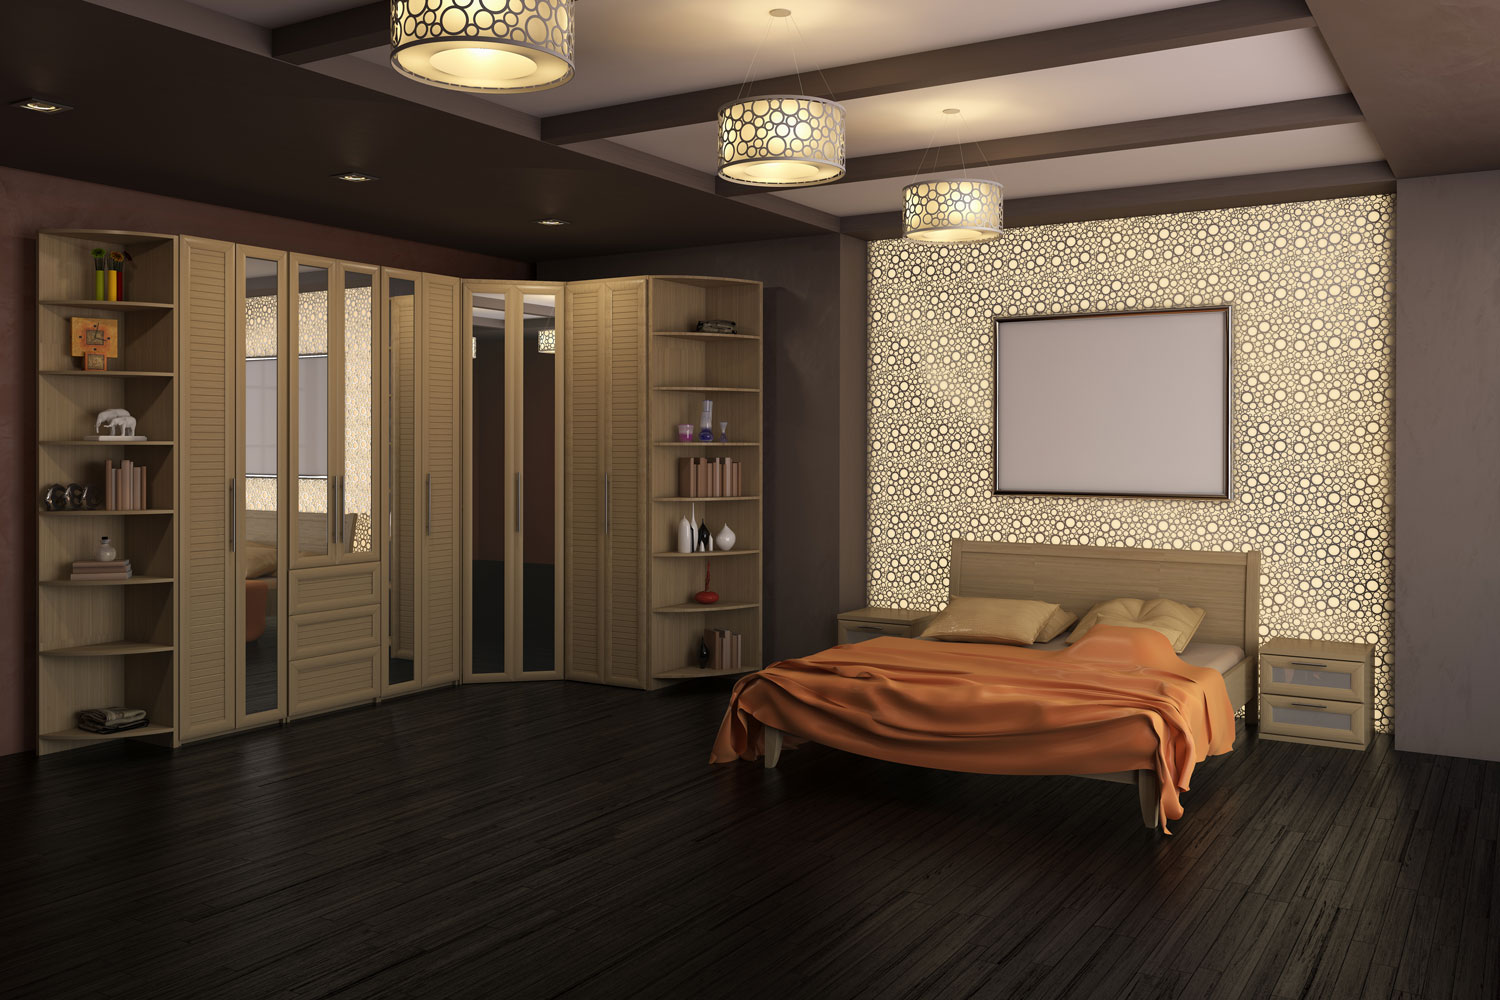 A spacious and luxurious bedroom with dark wood flooring and white paneled cabinets and a bed with orange beddings